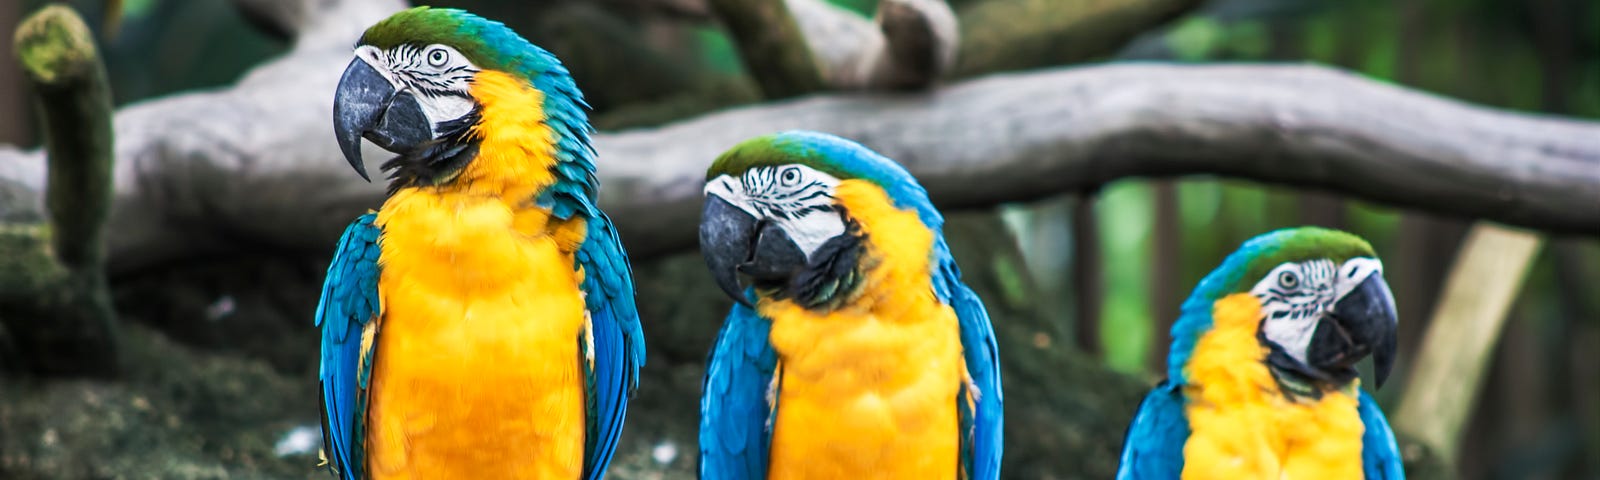 Three blue and yellow parrots on a branch.